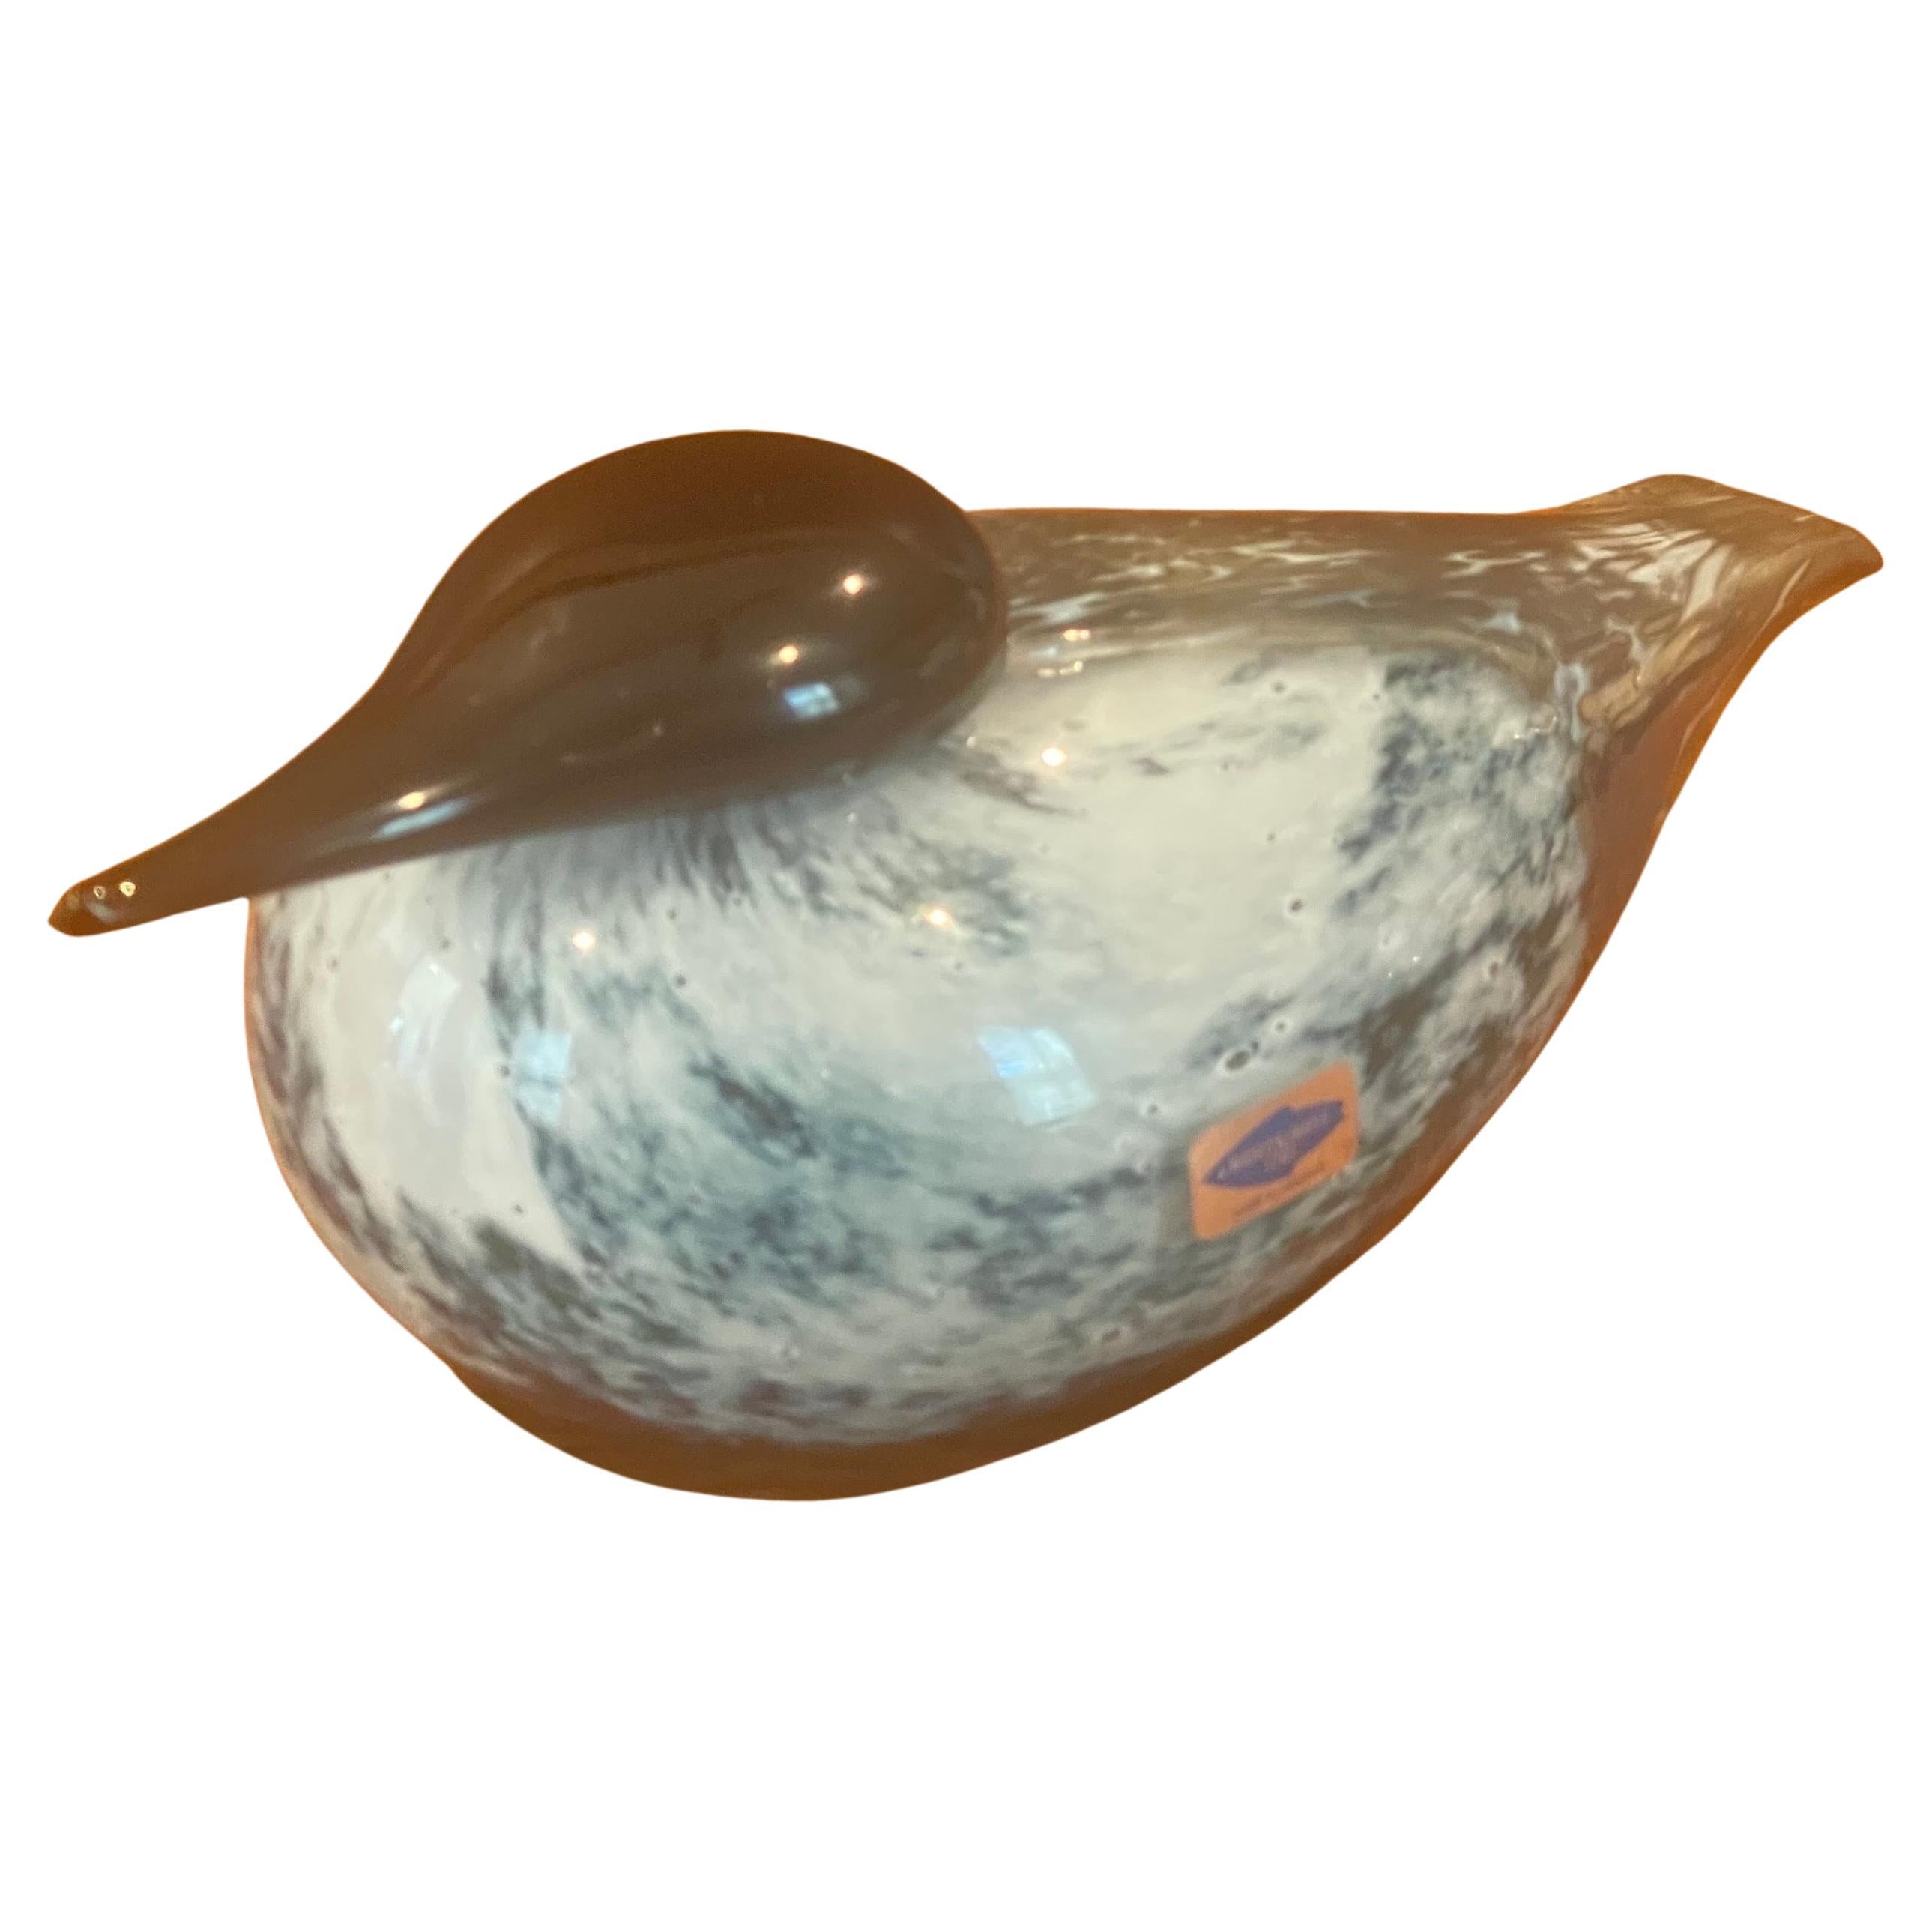 Limited Edition Art Glass Bird Sculpture by Oiva Toikka / Nuutajarvi of Finland For Sale 6